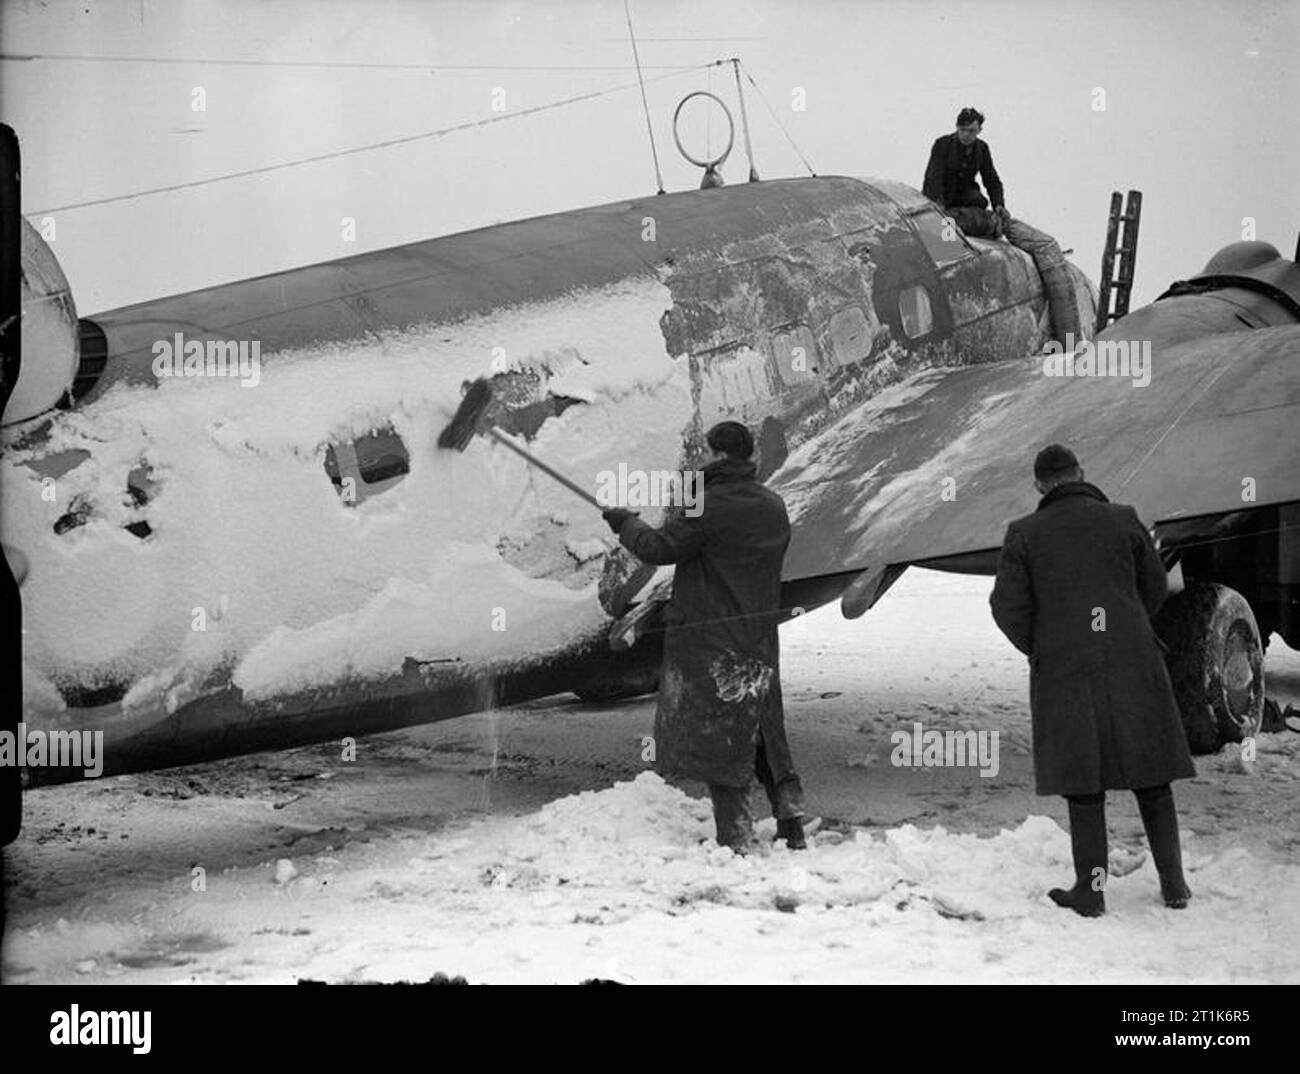 Royal Air Force Coastal Command, 1939-1945. Groundcrew scraping snow from a Lockheed Hudson of No. 233 Squadron RAF at Thorney Island, Hampshire. Stock Photo